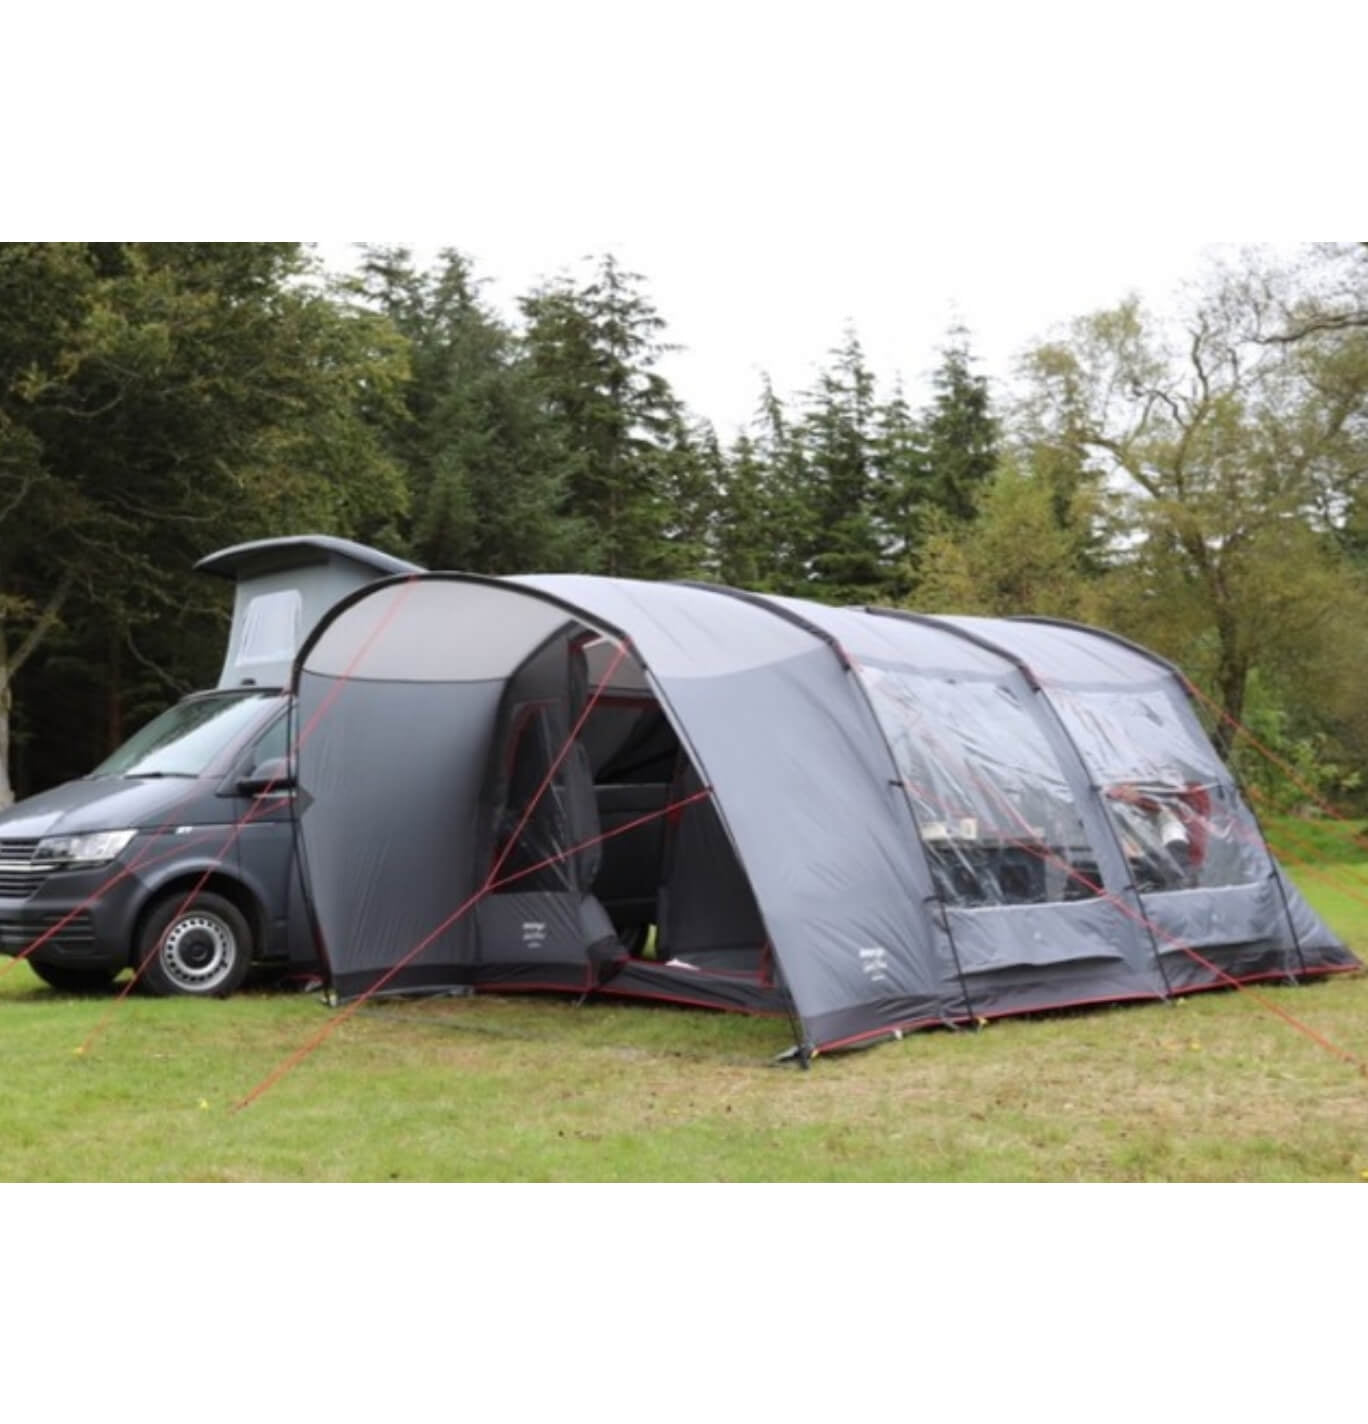 Vango Galli pitched to the VW